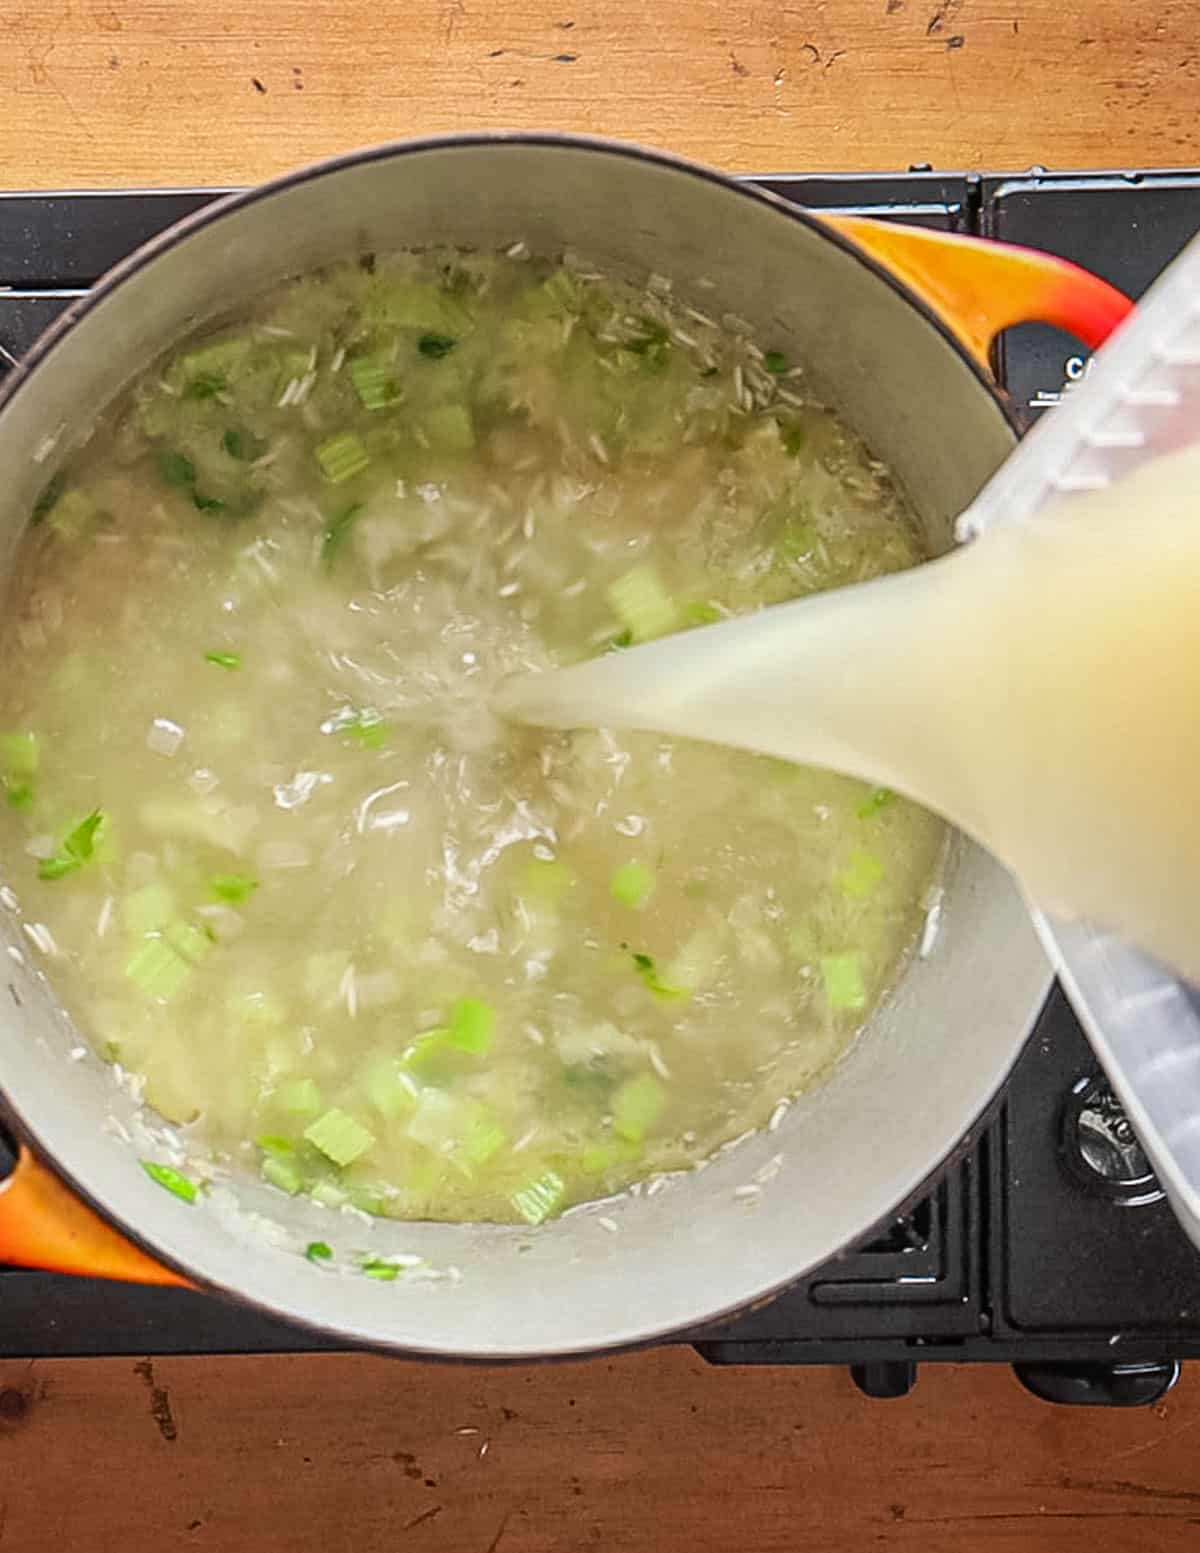 Pouring chicken stock into a pot of cooking rice, shallots and celery.